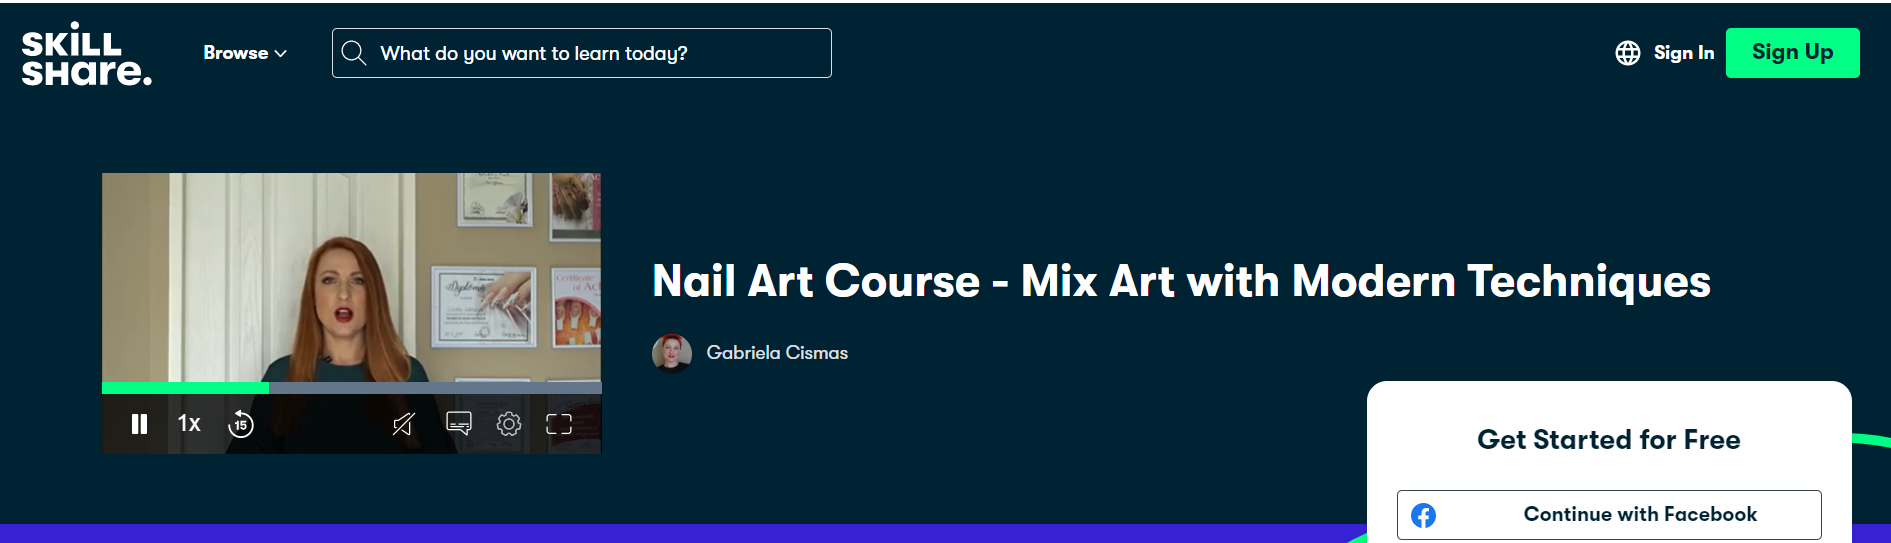 Nail Art Course - Mix Art with Modern Techniques